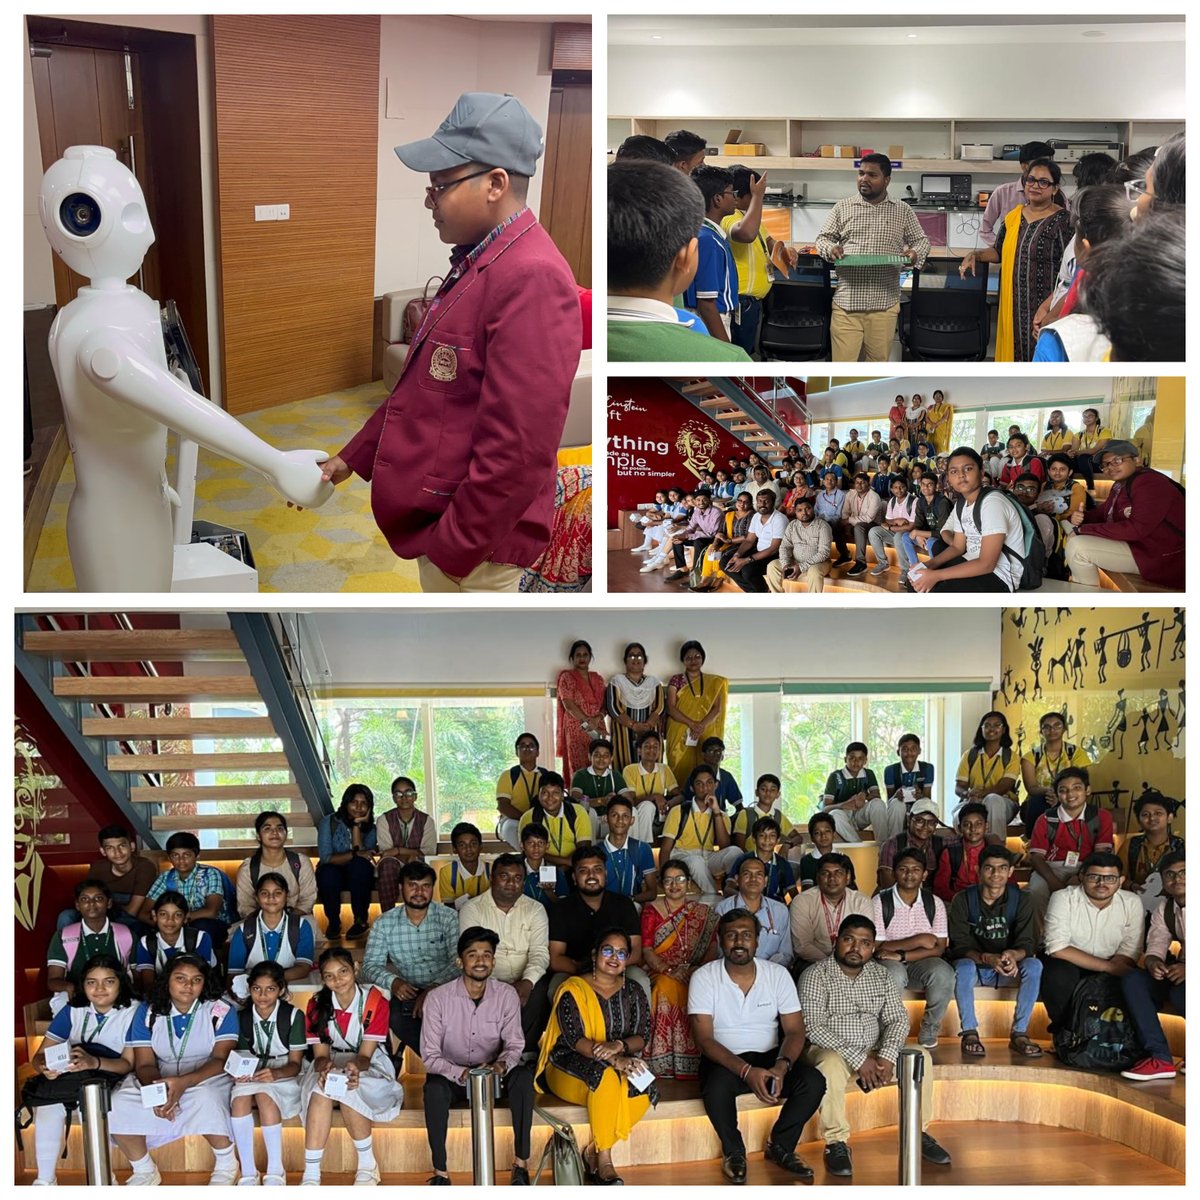 Students from @davpokhariput and Bjem School, Bhubaneswar visited @stpiepbbs facilities exploring the cutting-edge infrastructure and prototyping facilities aimed at supporting grassroots innovations. @stpiindia @MSH_MeitY @Rajeev_GoI @arvindtw @DeveshTyagii @s_subodh